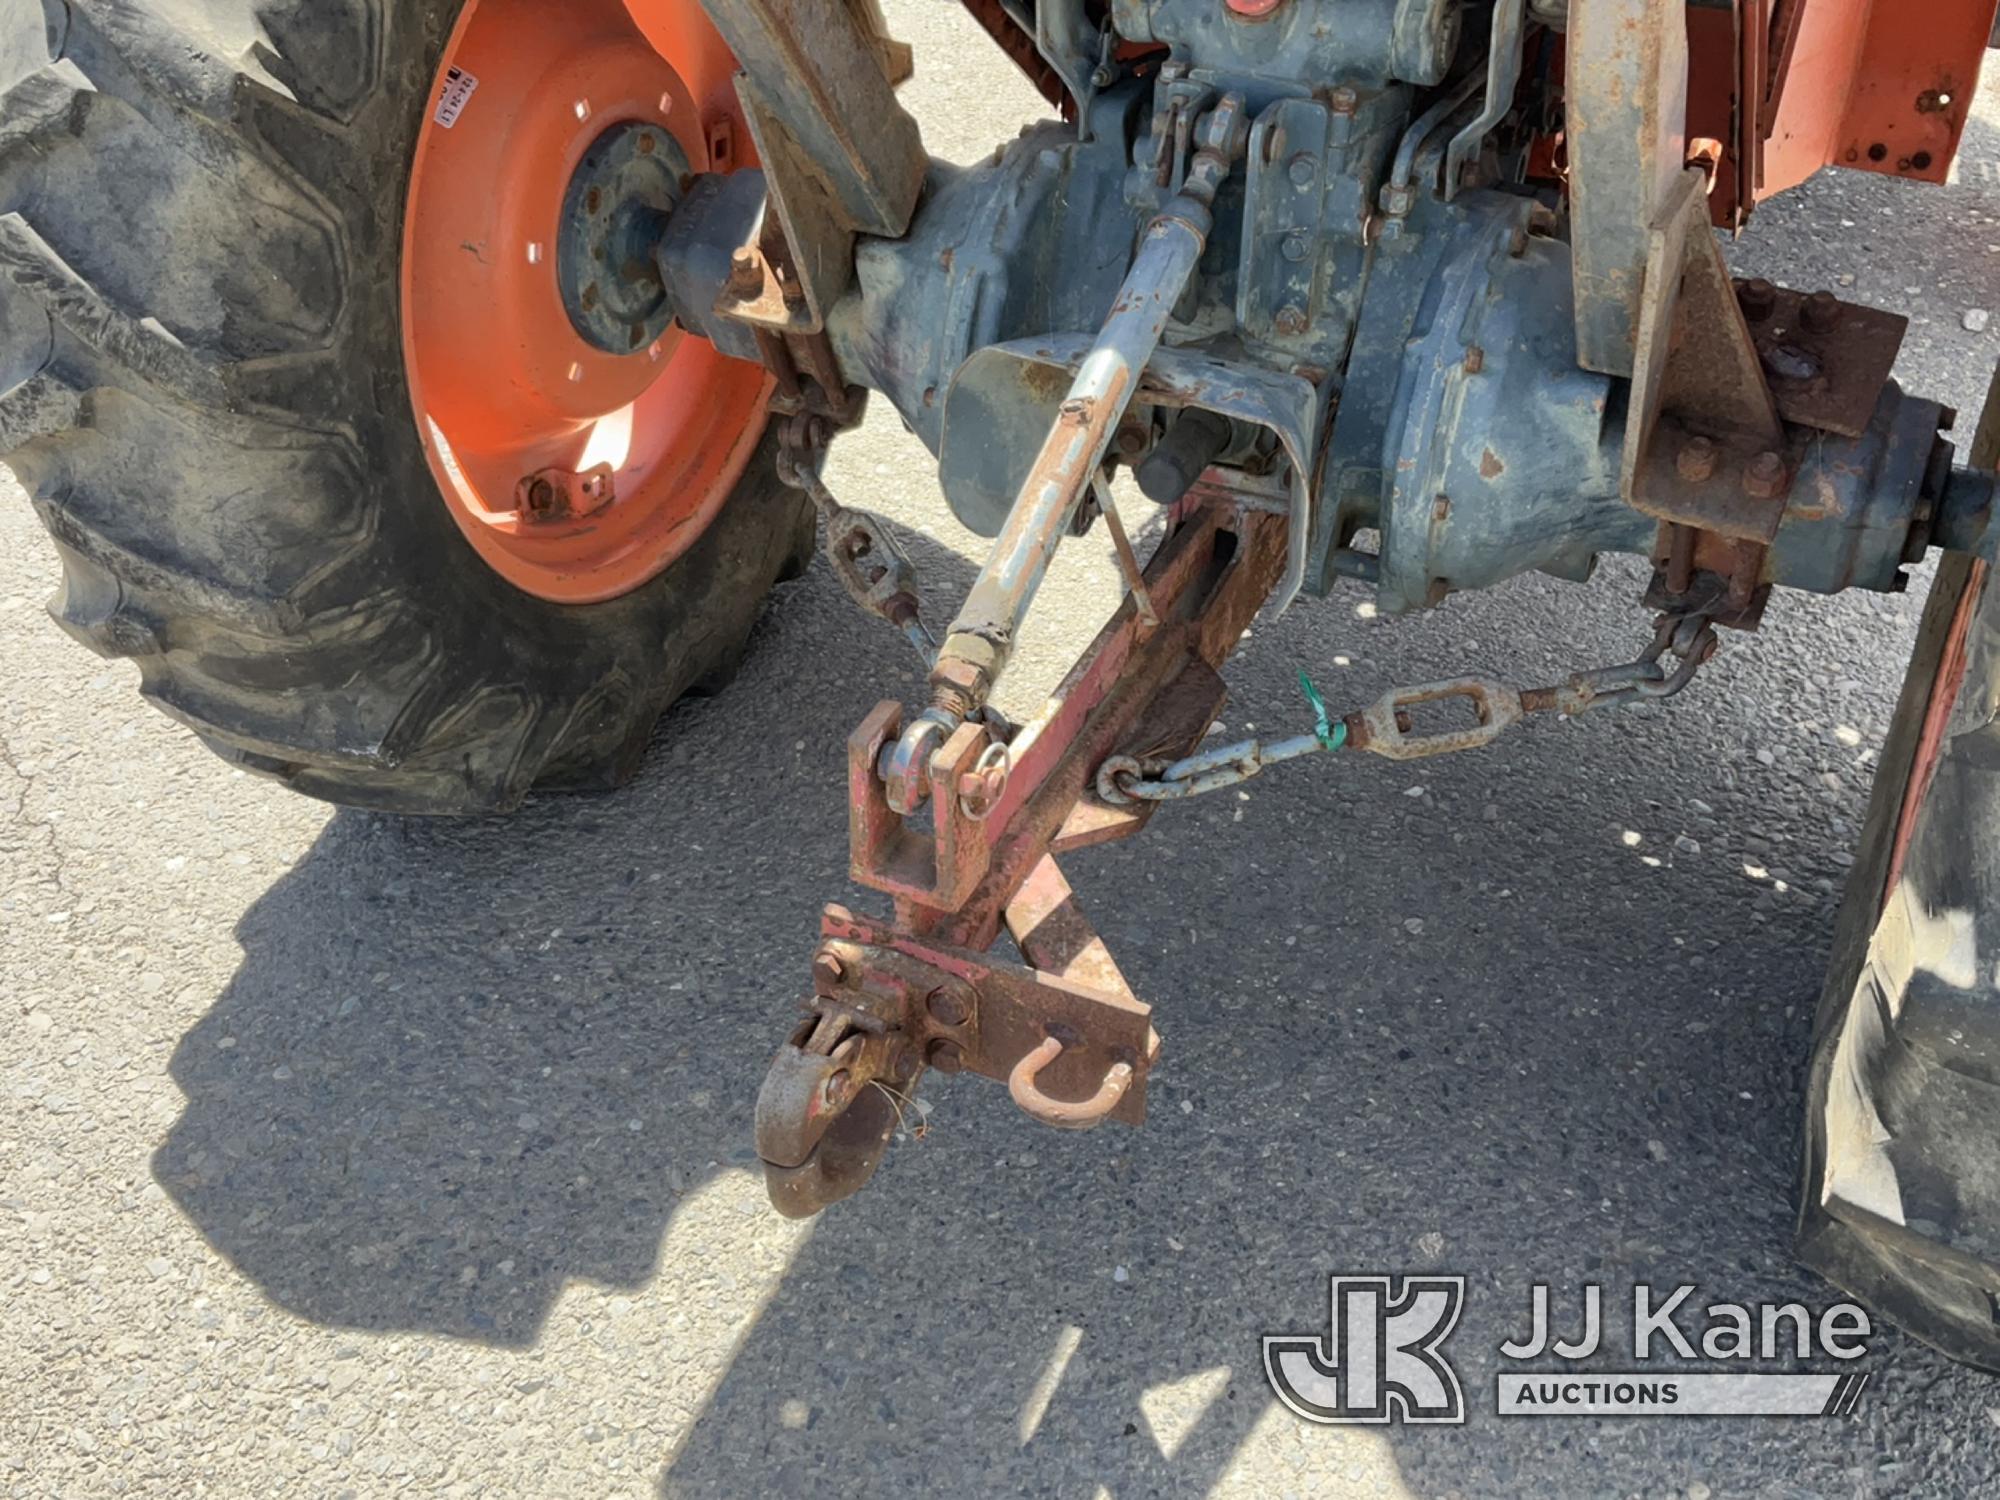 (Dixon, CA) Kubota L2050 Lawn Tractor Not Running, Condition Unknown, Rust Damage, Flat Tires